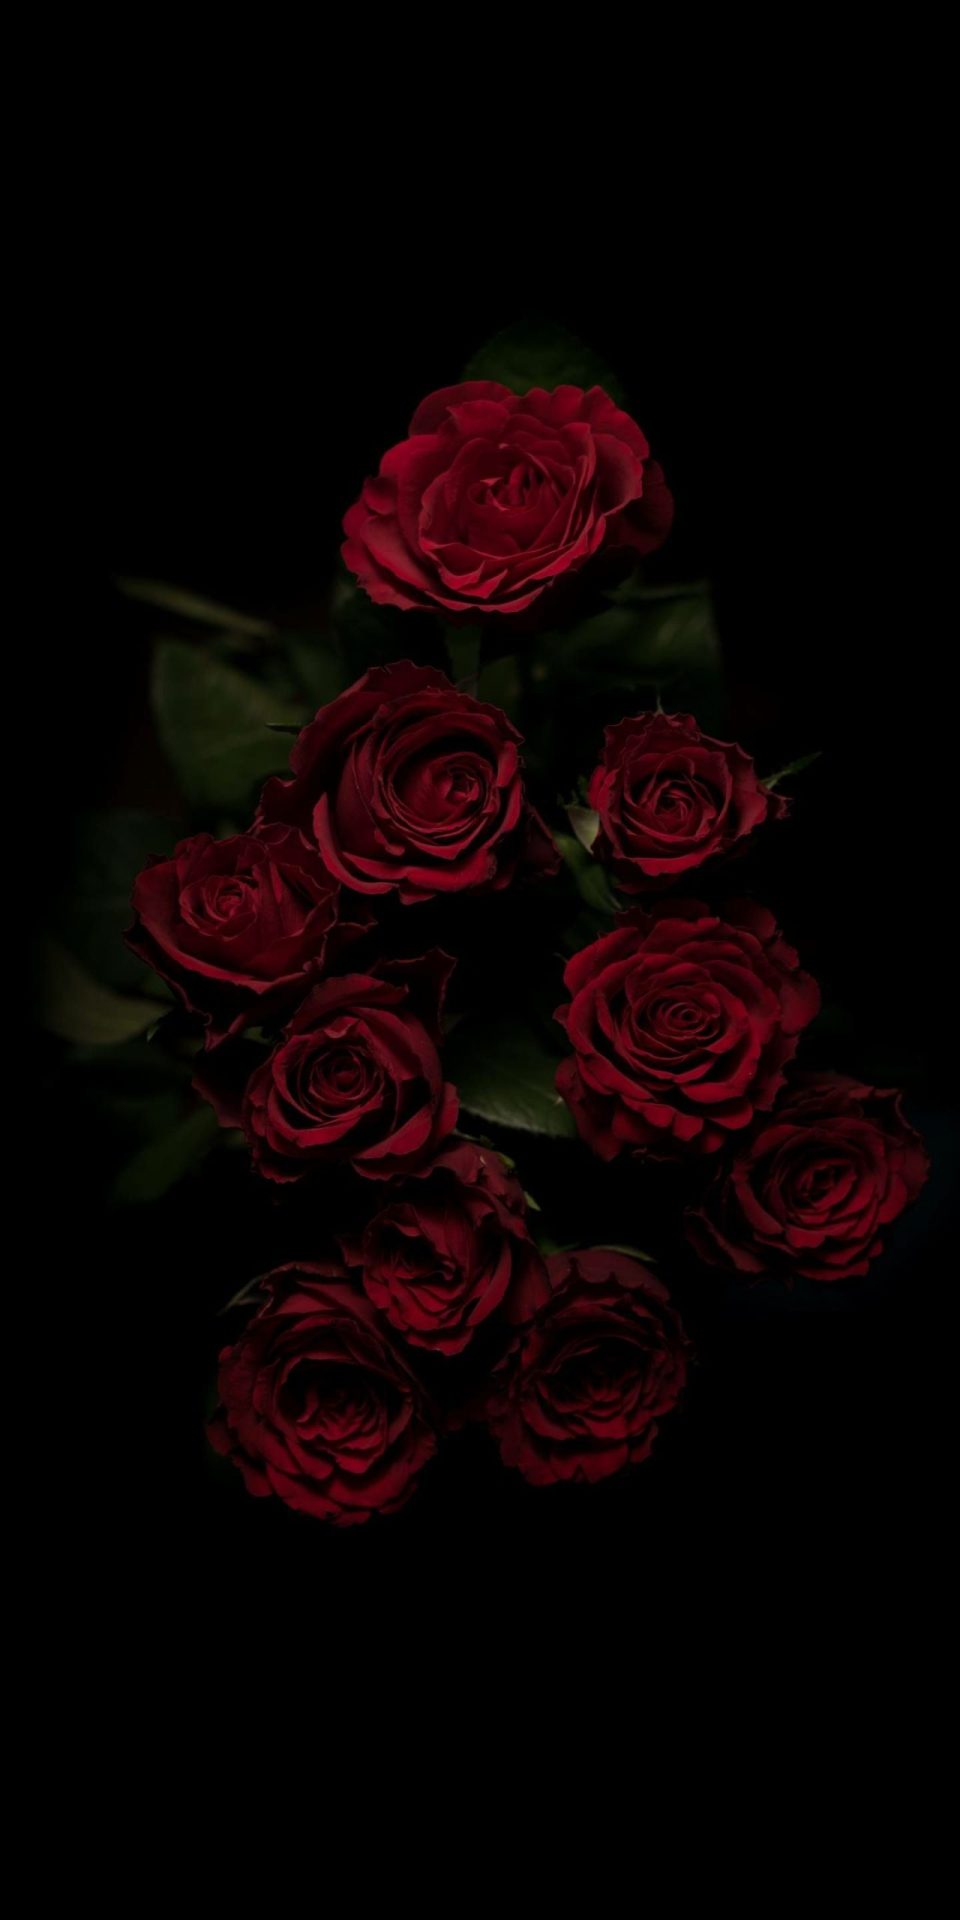 Aesthetics From my Camera Roll. Flowers black background, Rose wallpaper, Red roses wallpaper